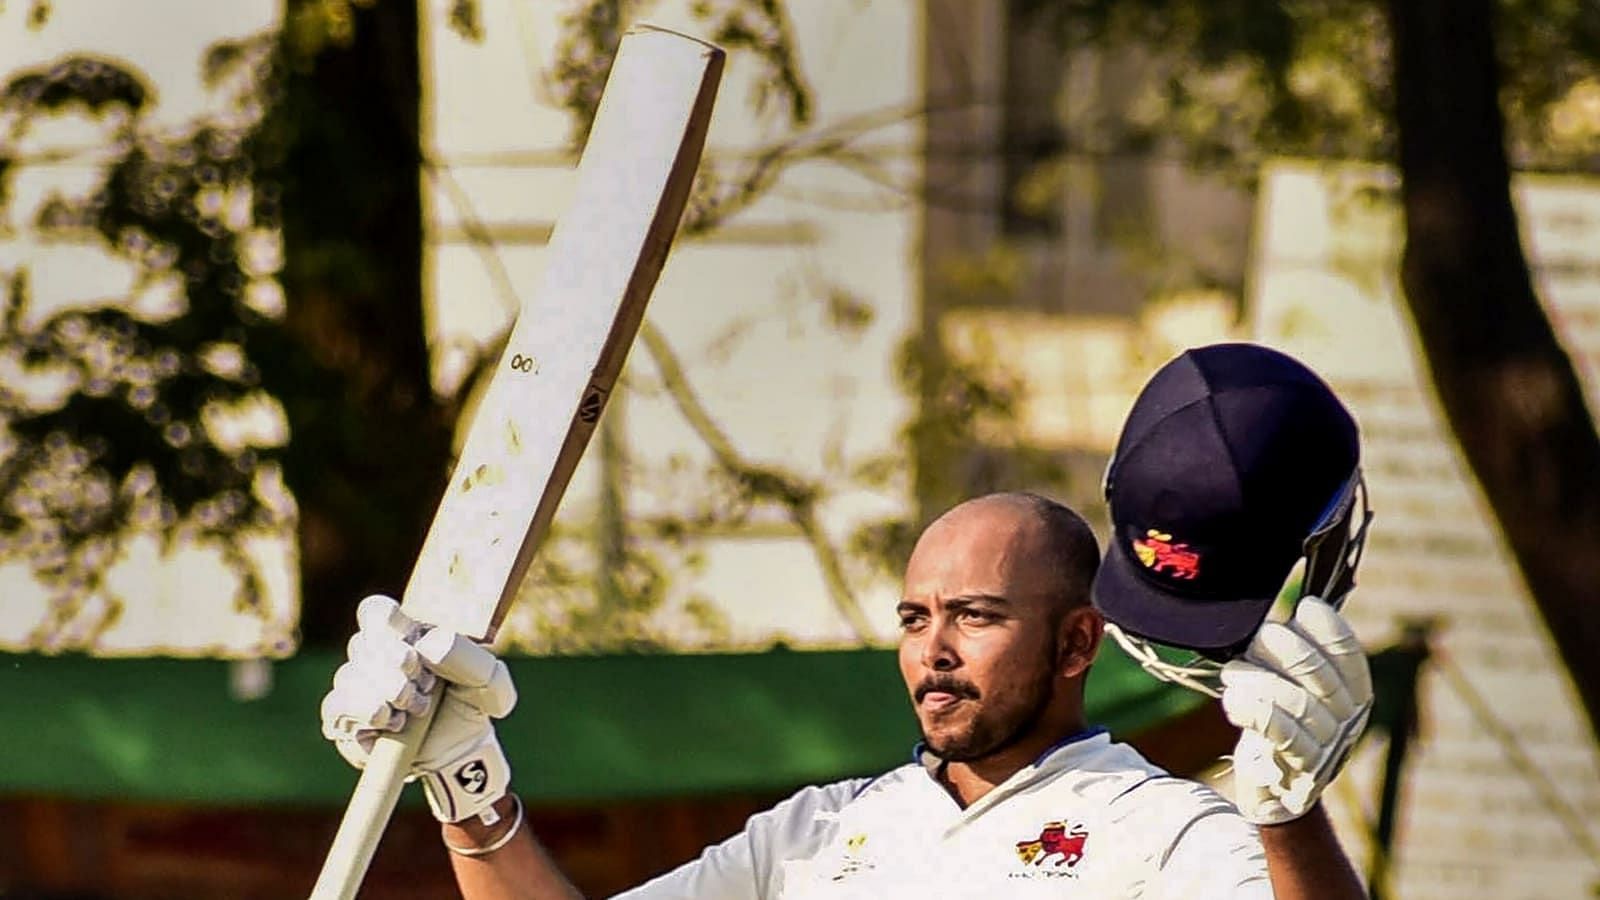 5 impressive stats from Prithvi Shaw's 379 in the Ranji Trophy